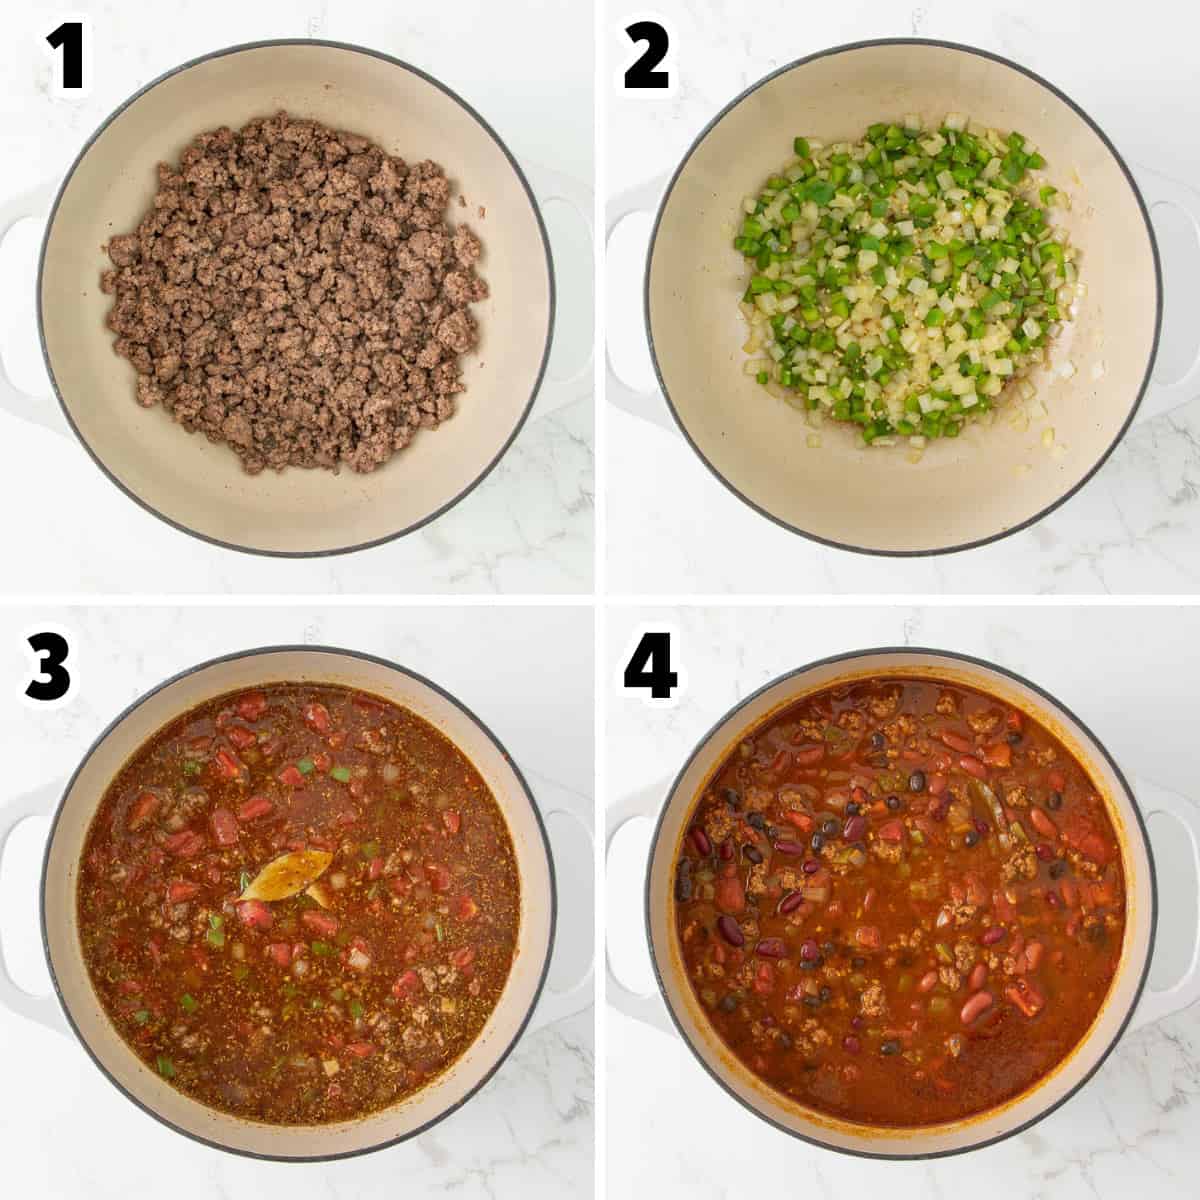 Steps showing how to make beer chili.